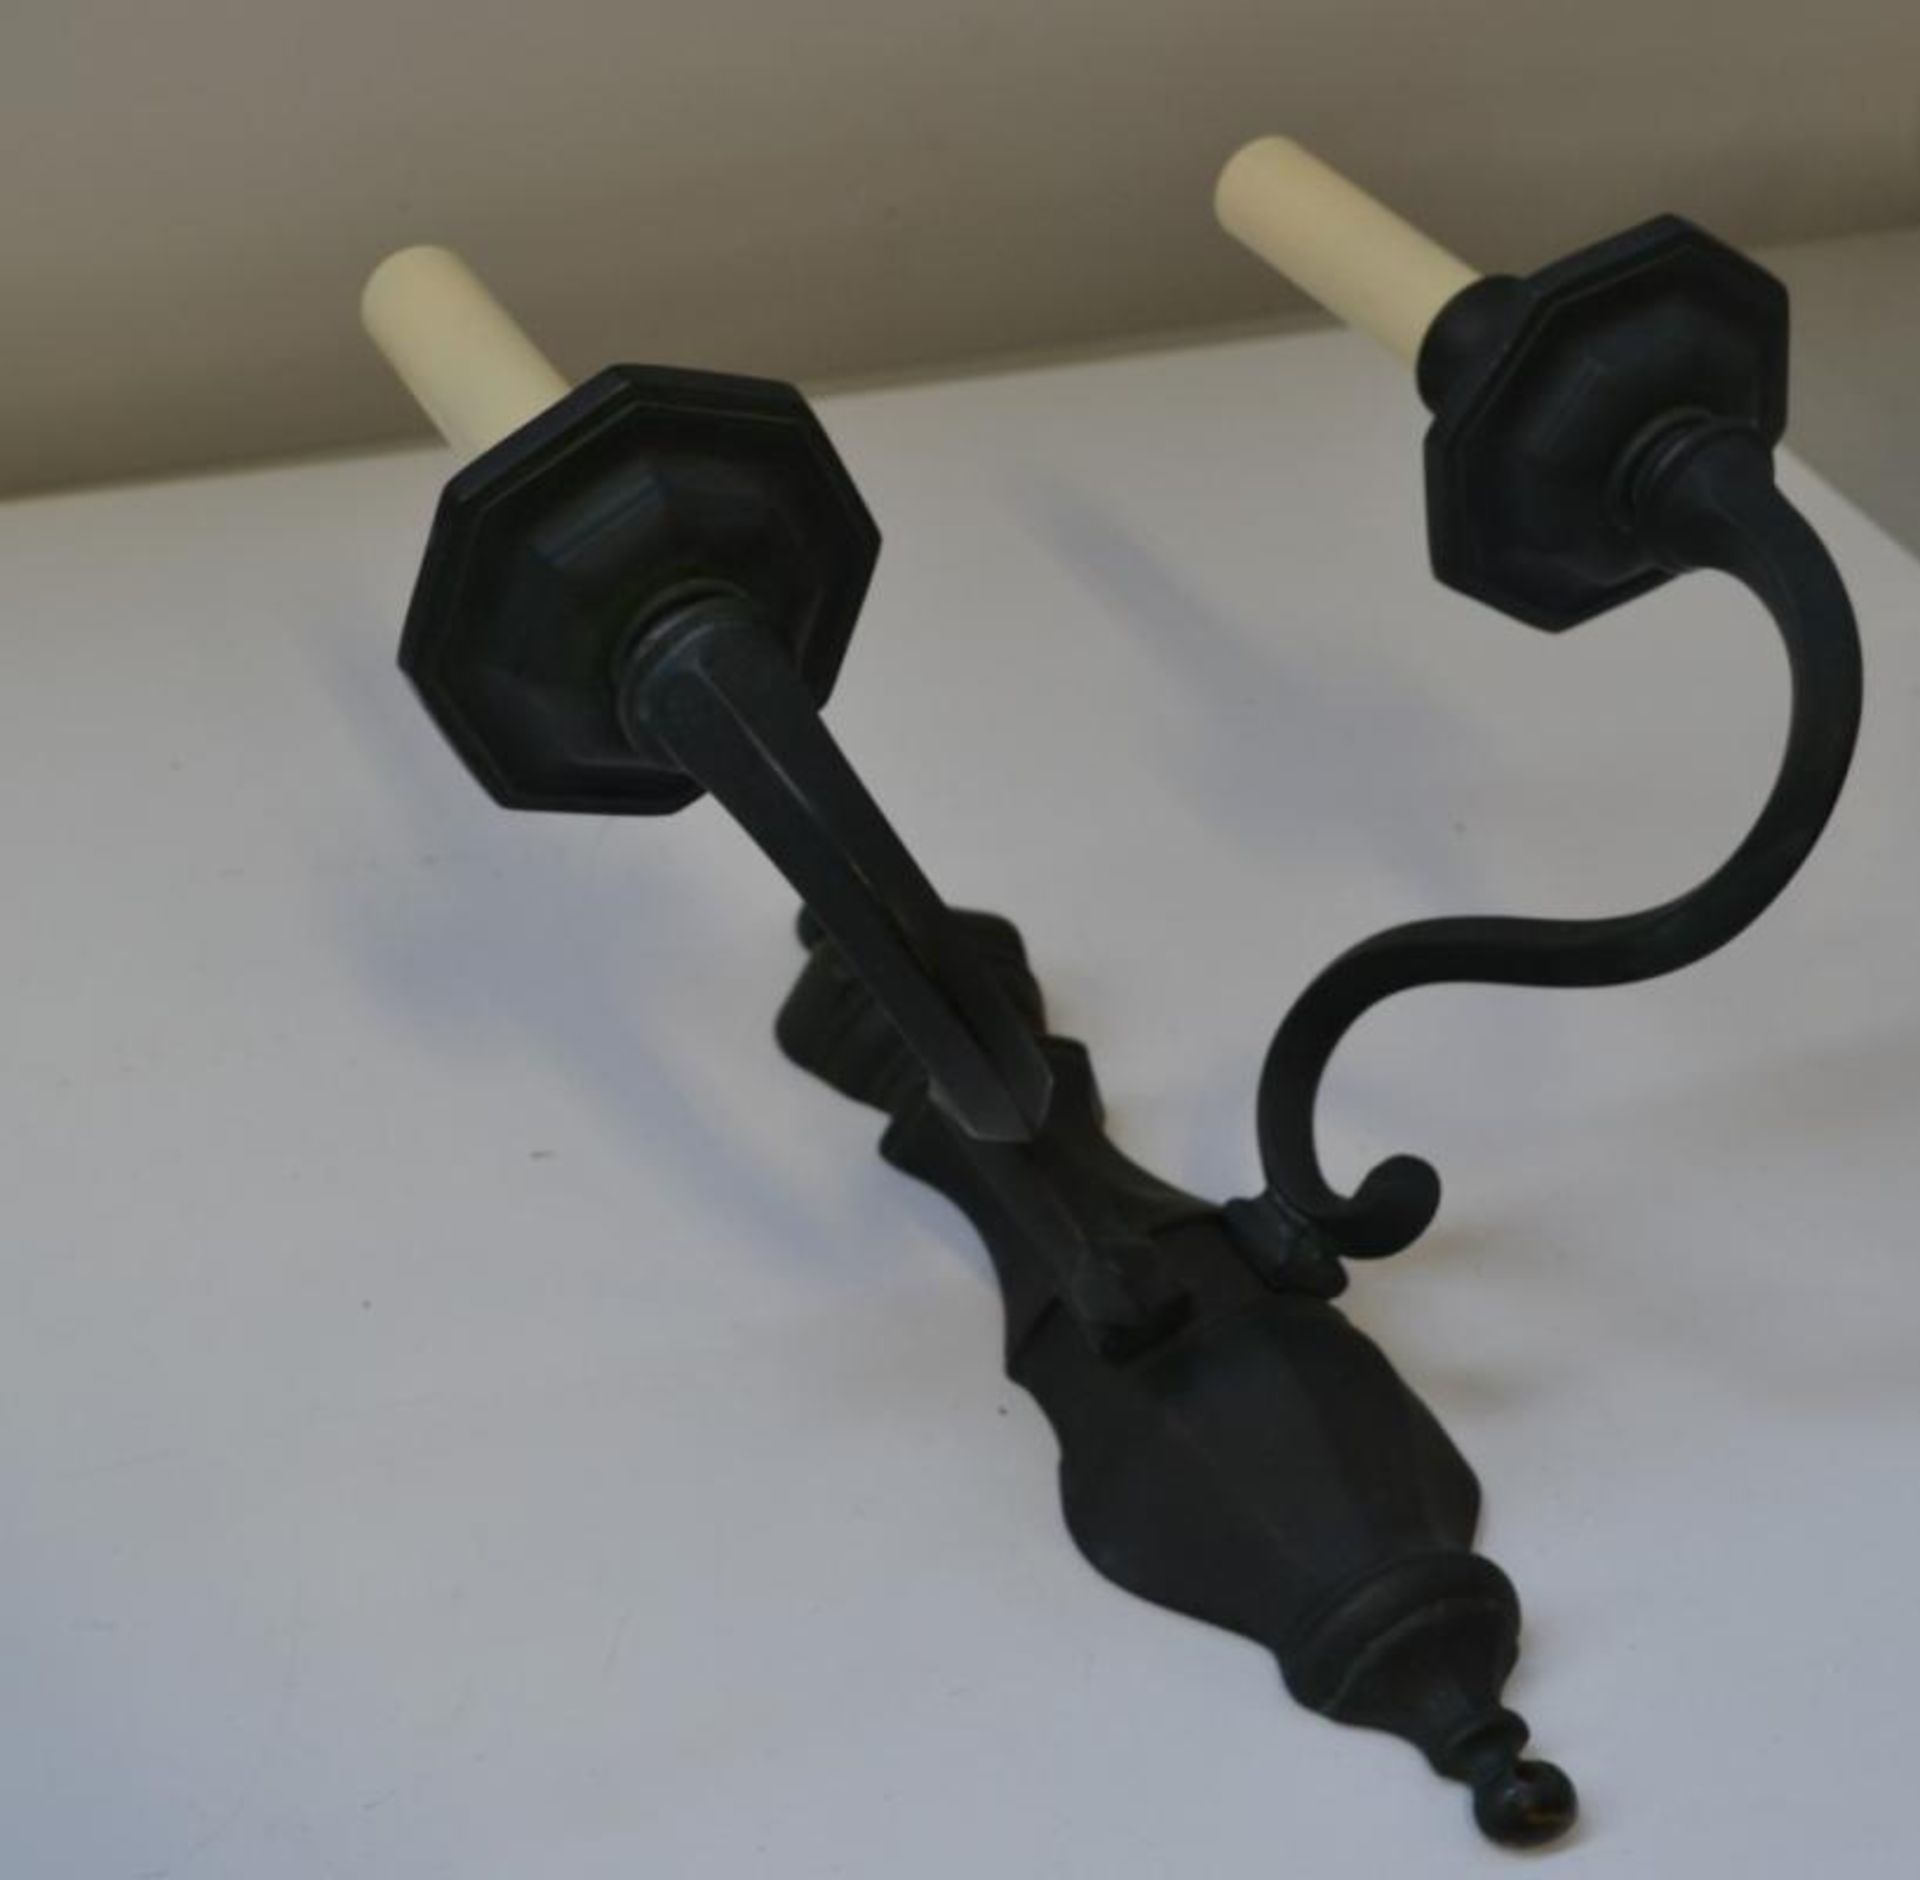 1 x CHELSOM Ornate Wall Light Fitting In Black - Dimensions: H32/L32cm - New/Unused boxed stock - CL - Image 2 of 3